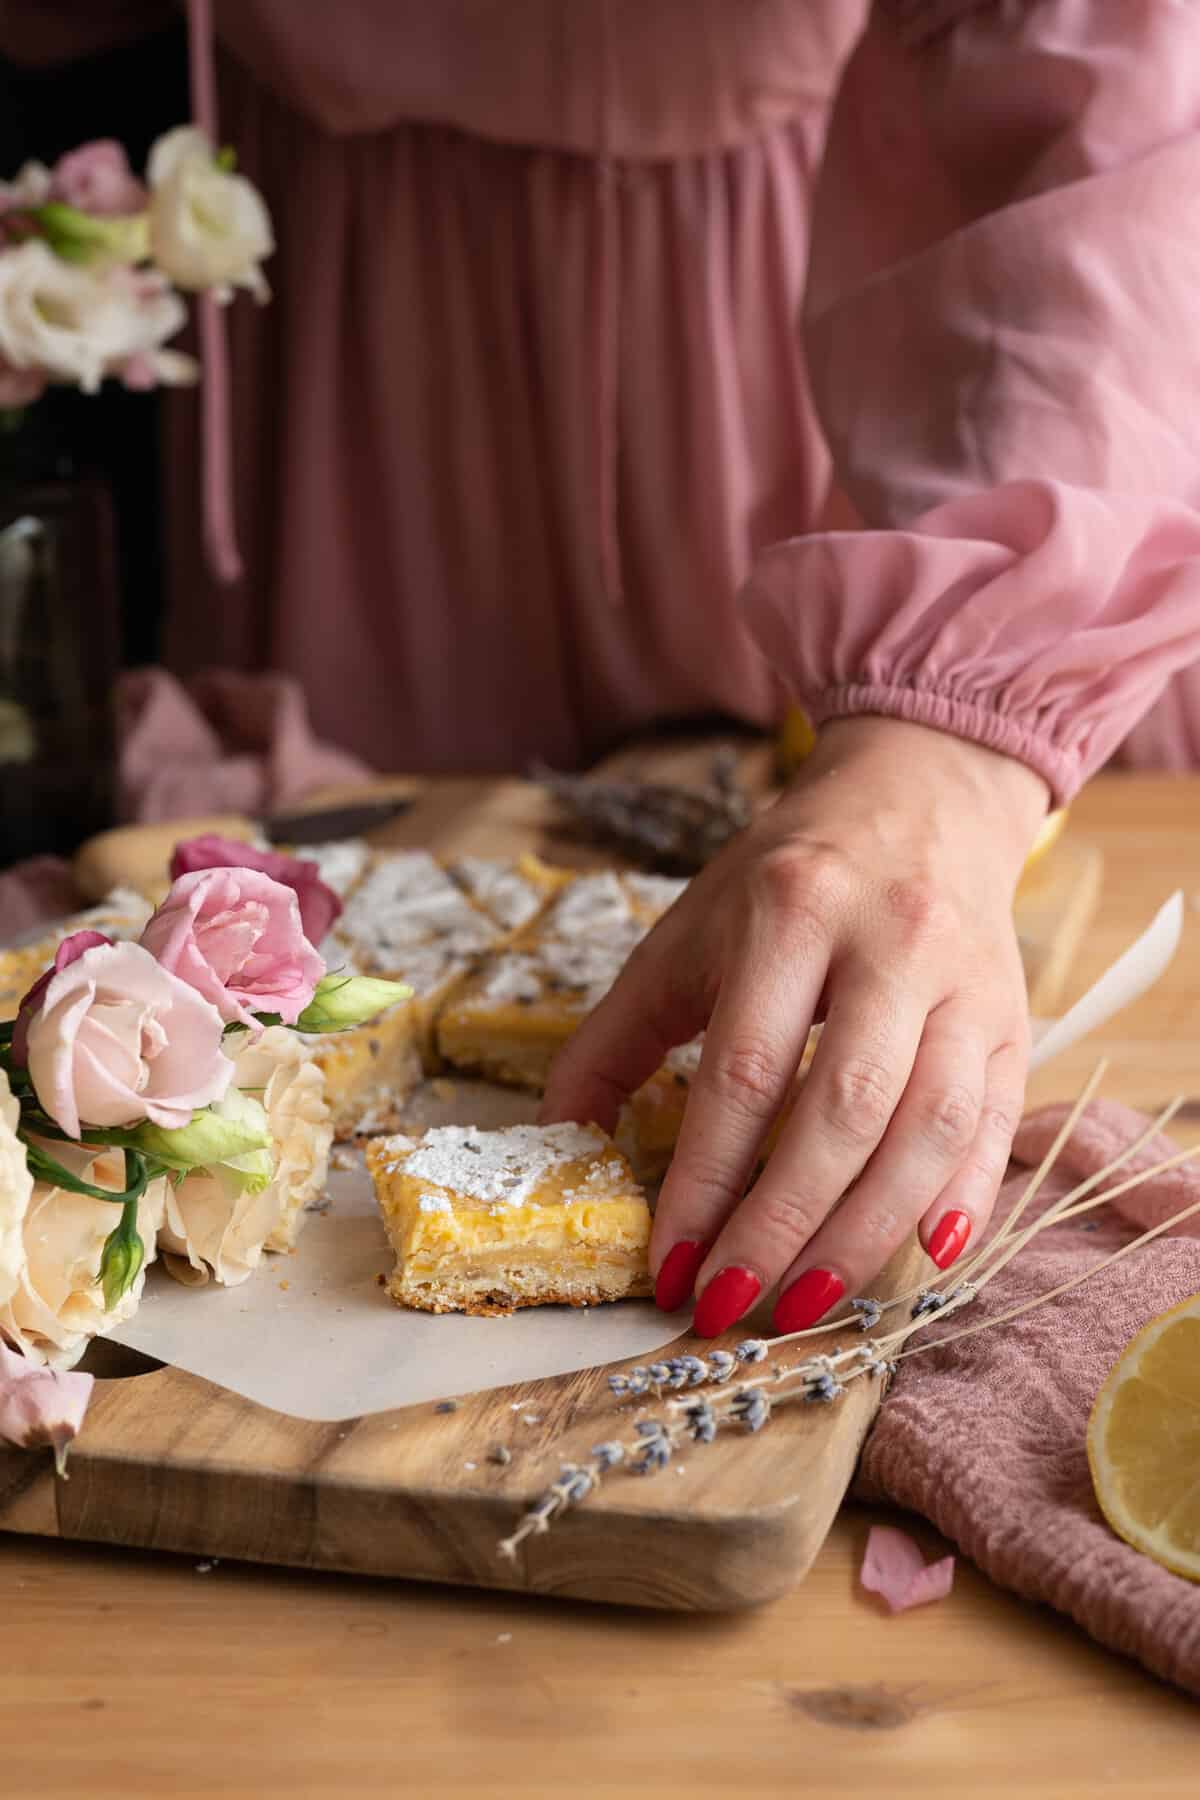 womans hand with red nails grabbing lavender lemon bar, next to a pink bouqet of roses